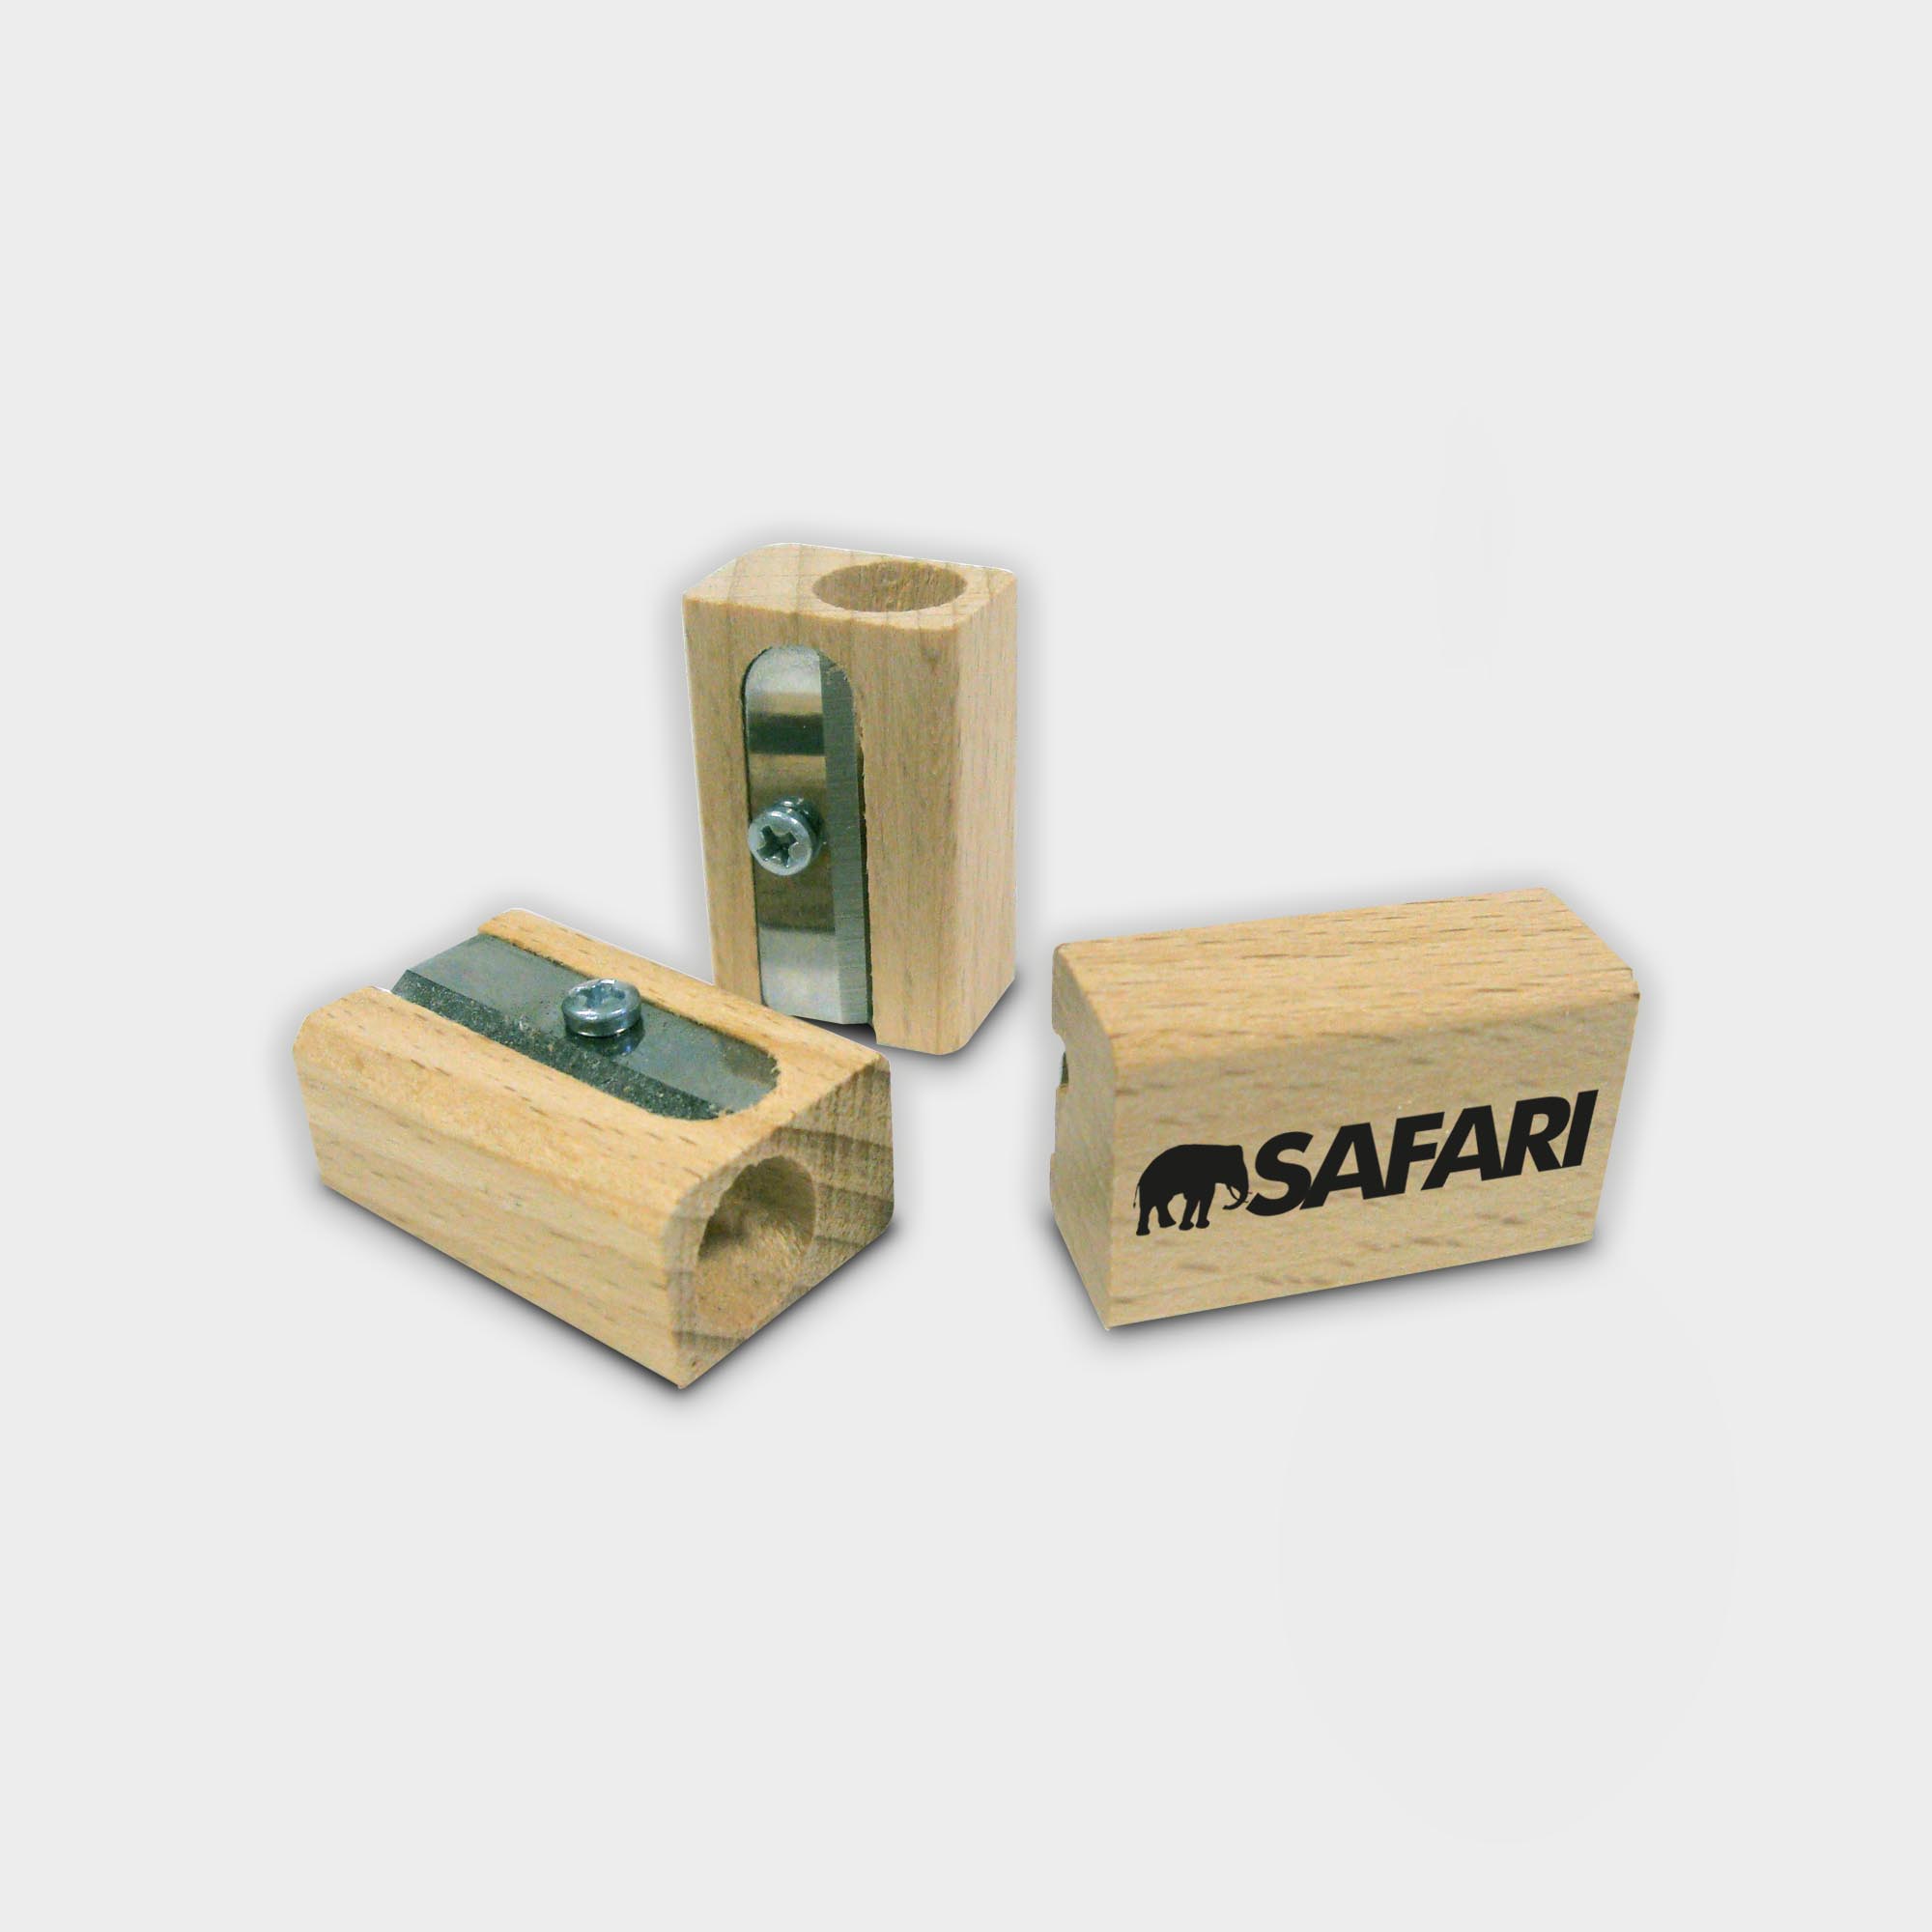 The Green & Good Single Pencil Sharpener is made from sustainable wood. Comes with a high-quality blade for long-lasting sharpening. Made in Germany from sustainable beech wood.